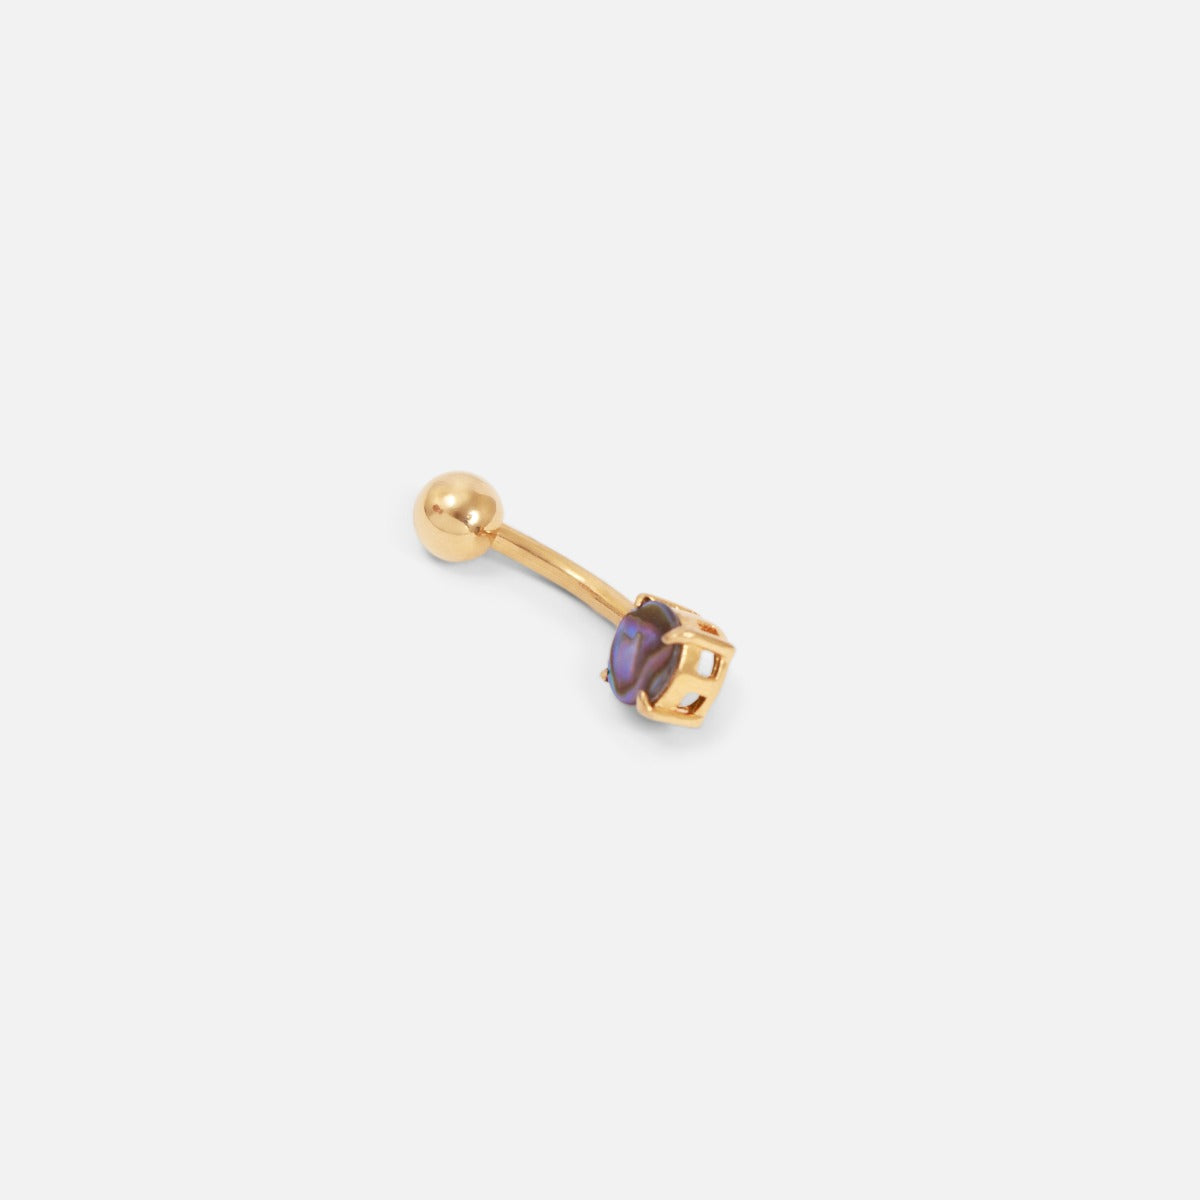 Golden stainless steel belly button ring with abalone stone